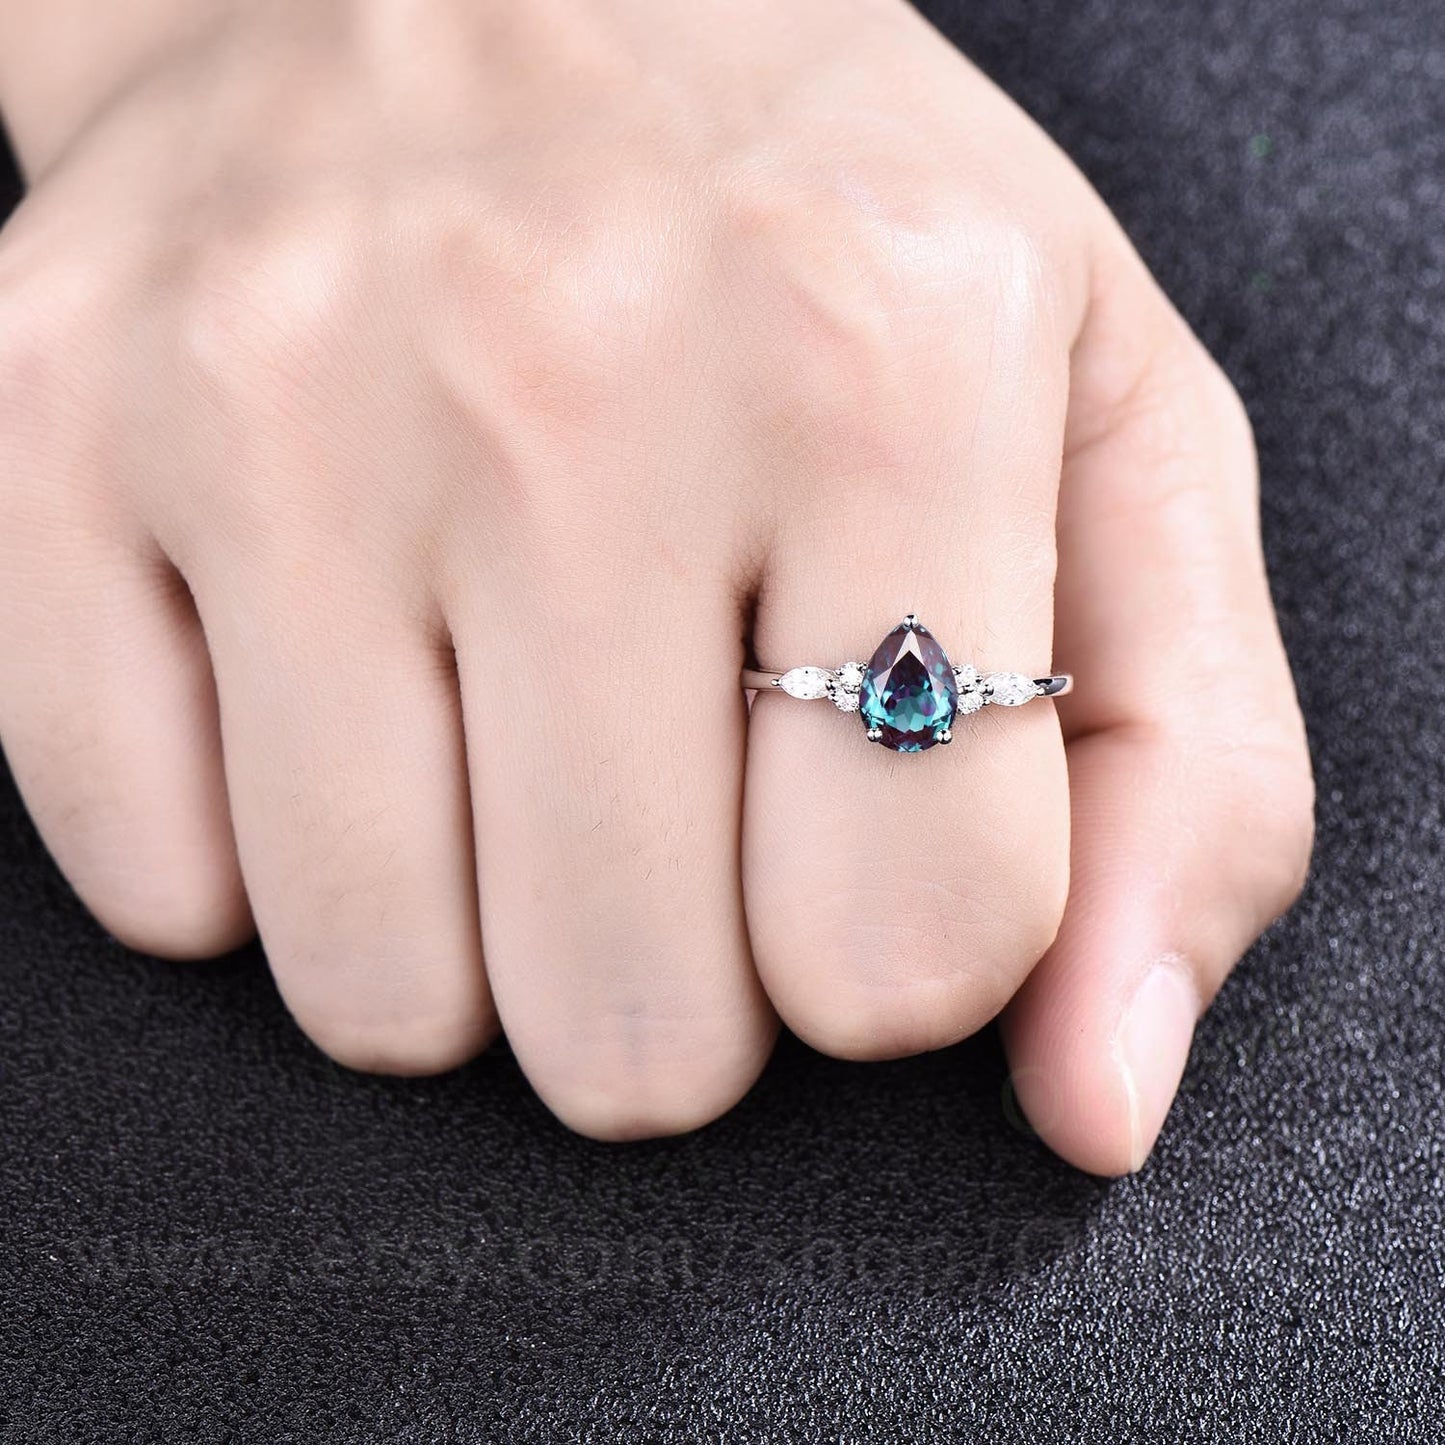 Color change Alexandrite ring for women unique vintage pear shaped Alexandrite engagement ring 14k rose gold minimalist June birthstone ring